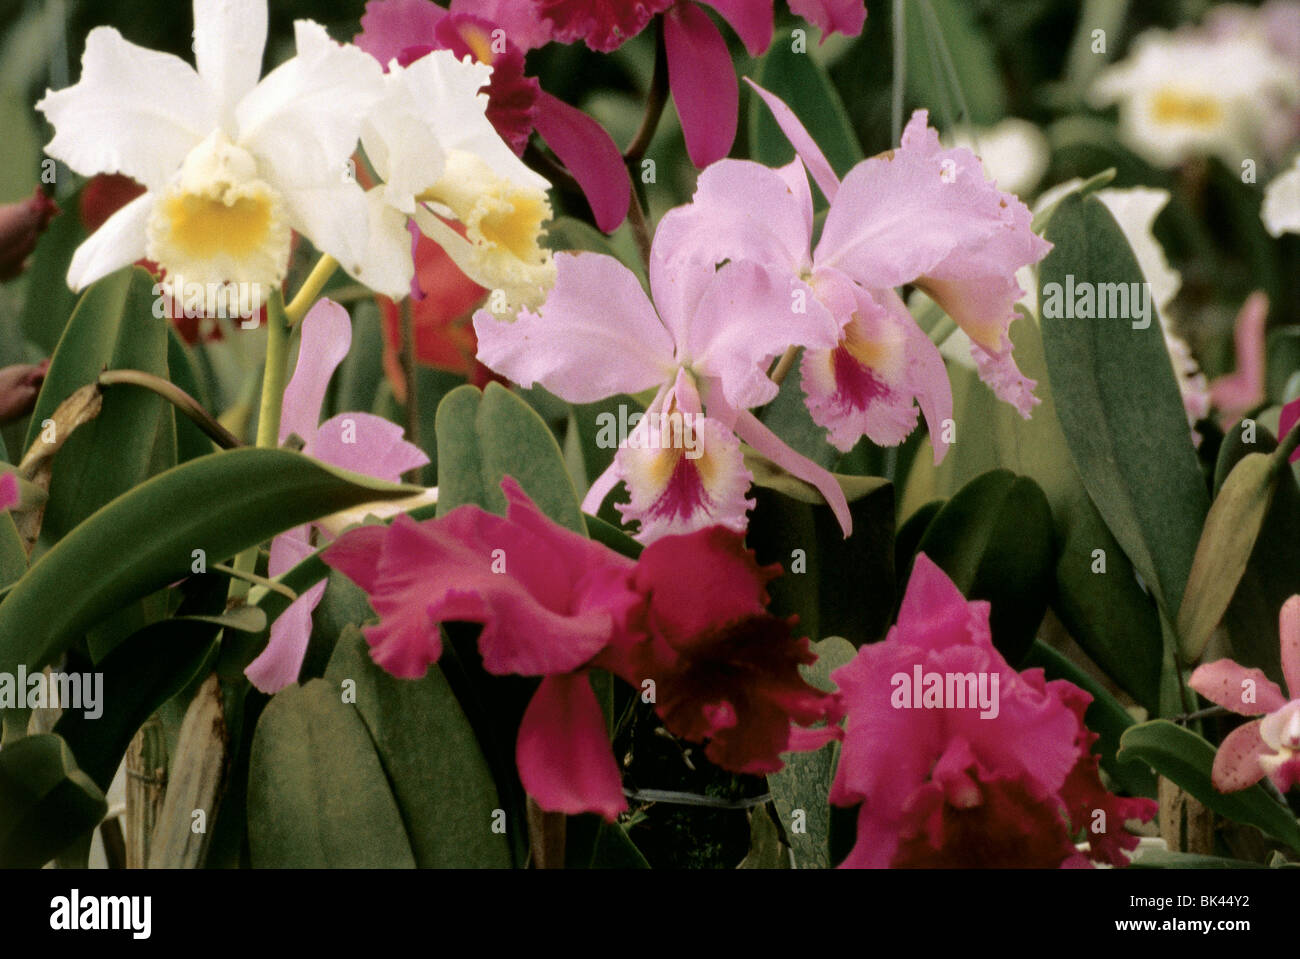 Blooming orchid plants, Brazil Stock Photo